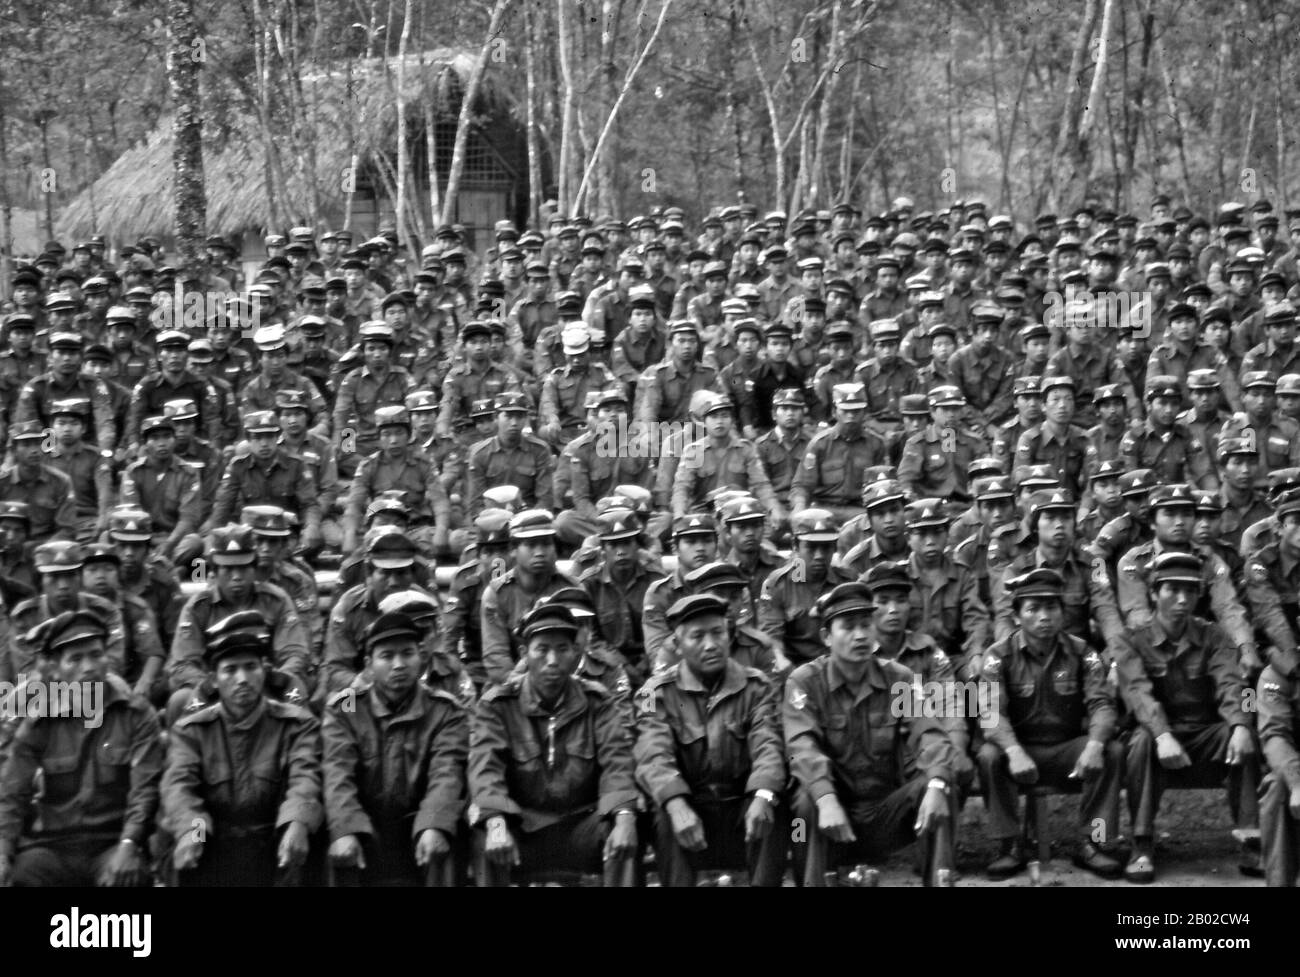 The Kachin Independence Army (KIA) is the military arm of the Kachin Independence Organization (KIO), a political group composed of ethnic Kachins in northern Burma (Myanmar). In May 2012, the Associated Press reported that the rebel group had 8,000 troops.  From 1961 until 1994, the KIA fought a grueling and inconclusive war against the Burmese junta. Originally the KIA fought for independence, but now the official KIO policy goal is for autonomy within a federal union of Burma.  The Kachin are an ethnic minority group that is indigenous to Burma. The northernmost region of Myanmar is Kachin Stock Photo